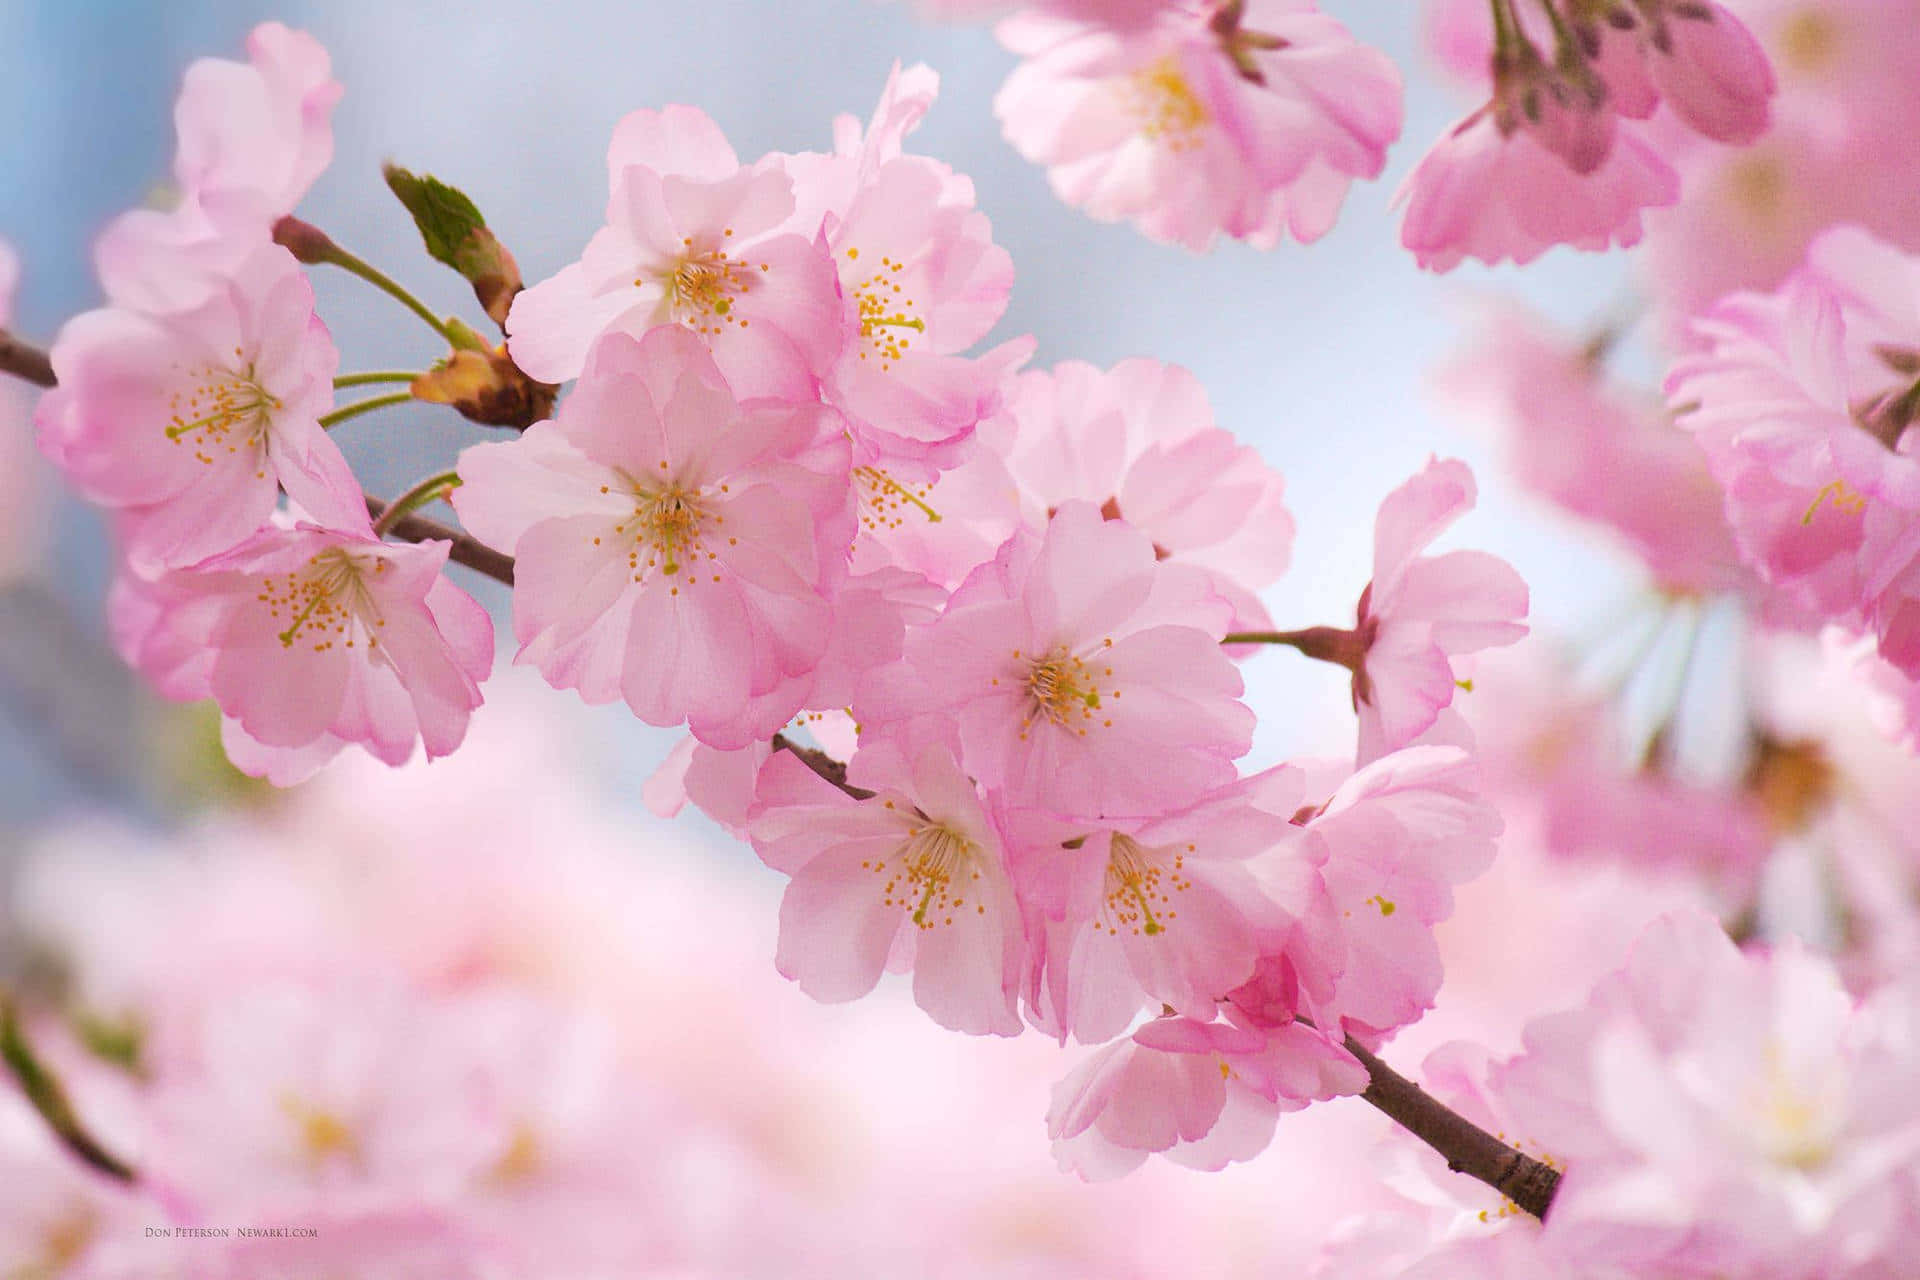 Delightful pink cherry blossoms against a pale yellow sky Wallpaper